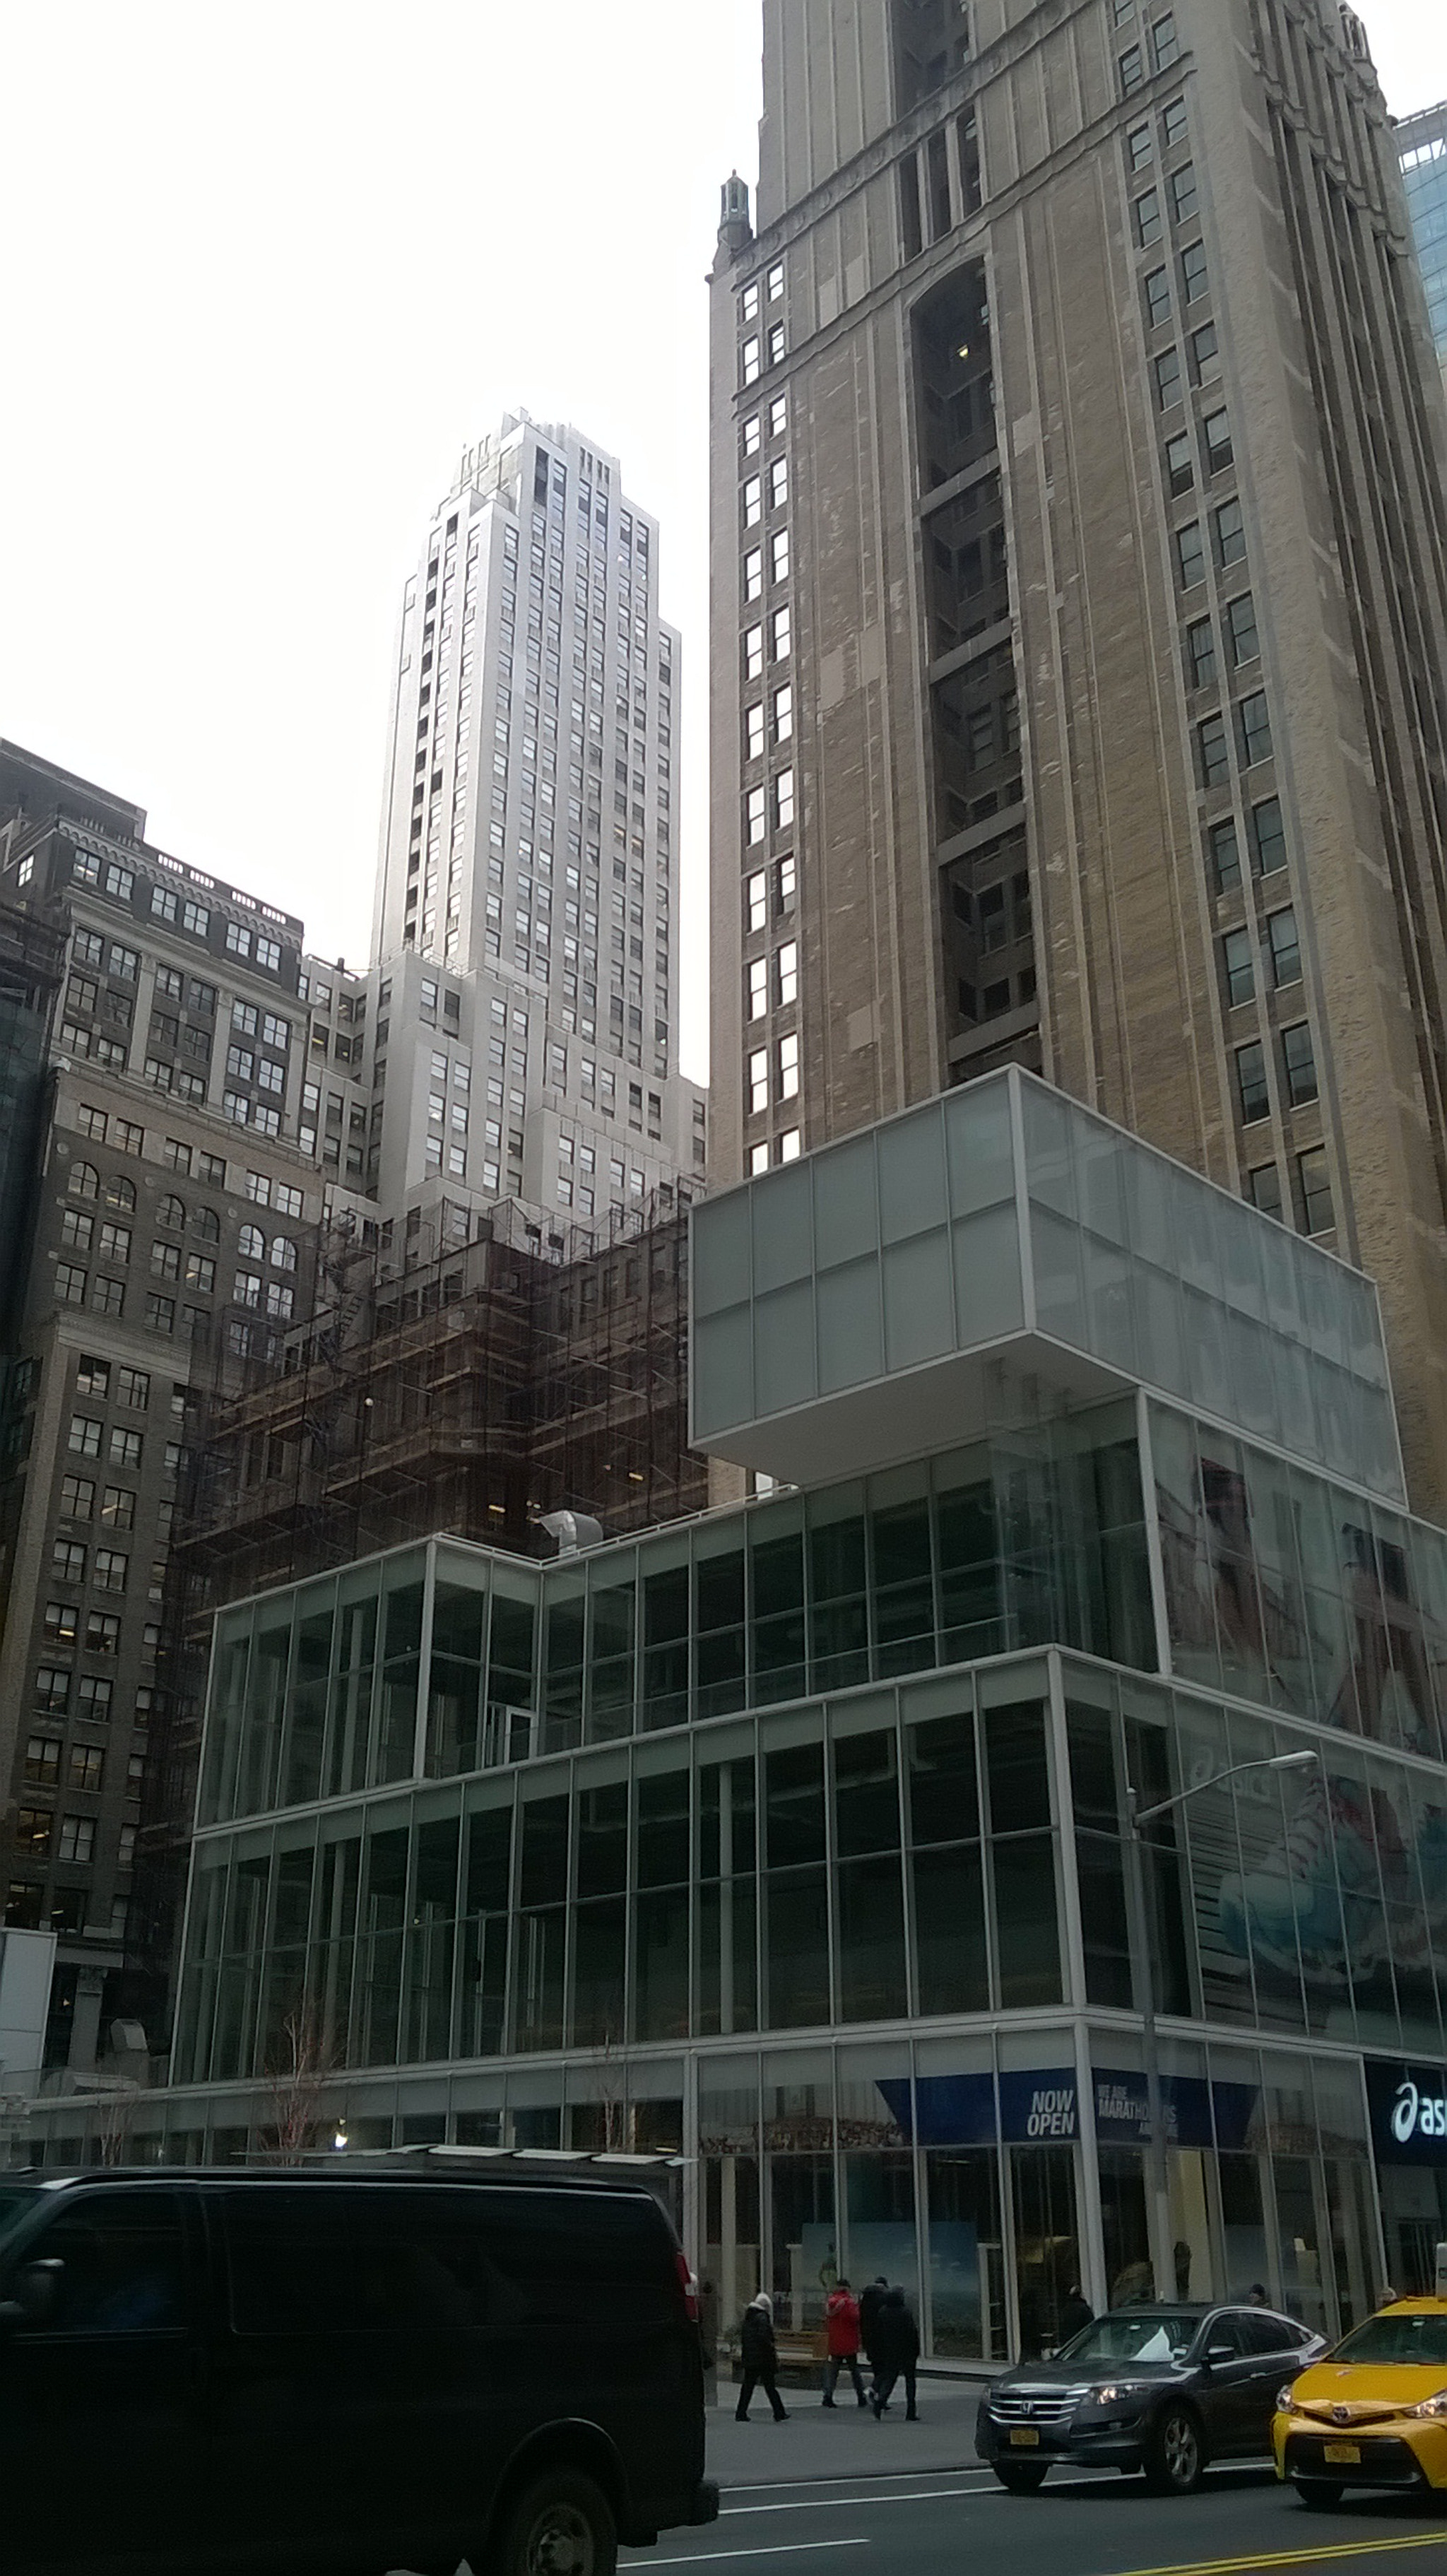 Nokia Lumia 635 sample photo. Nyc construx nd ave & th st bryant park () photography